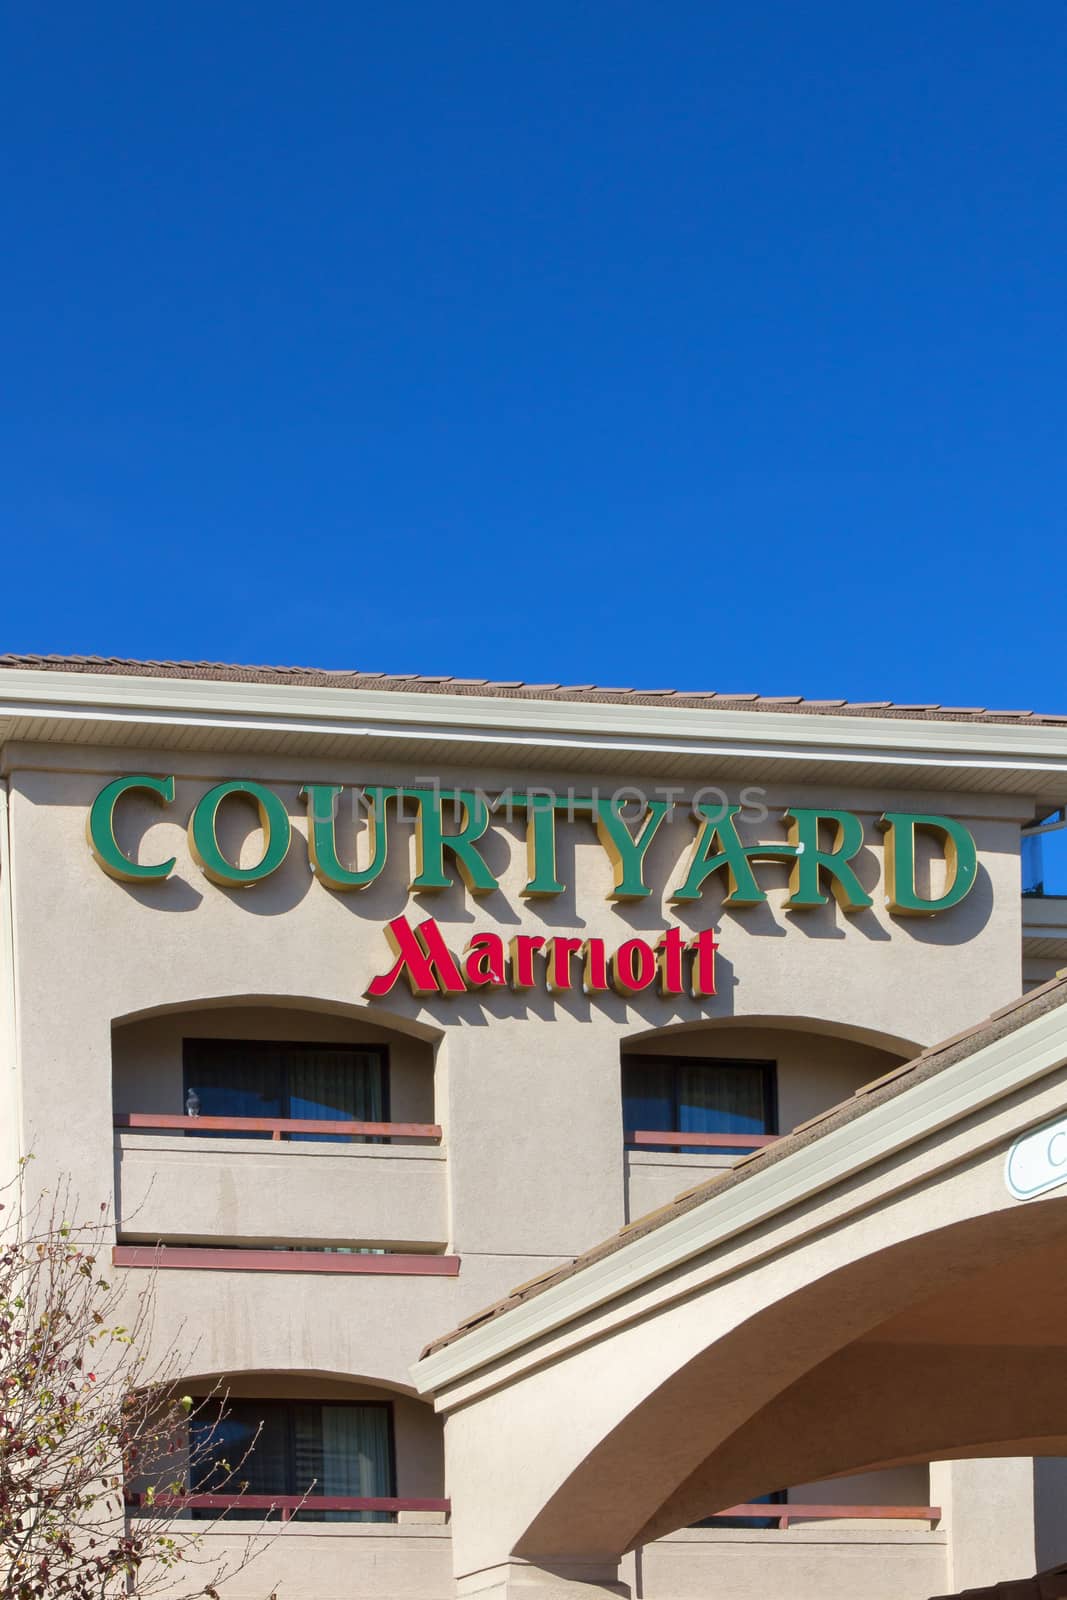 SALINAS, CA/USA - APRIL 23, 2014: Courtyard by Marriot motel exterior. Courtyard by Marriott is a brand of hotels owned by Marriott International designed for business travelers.